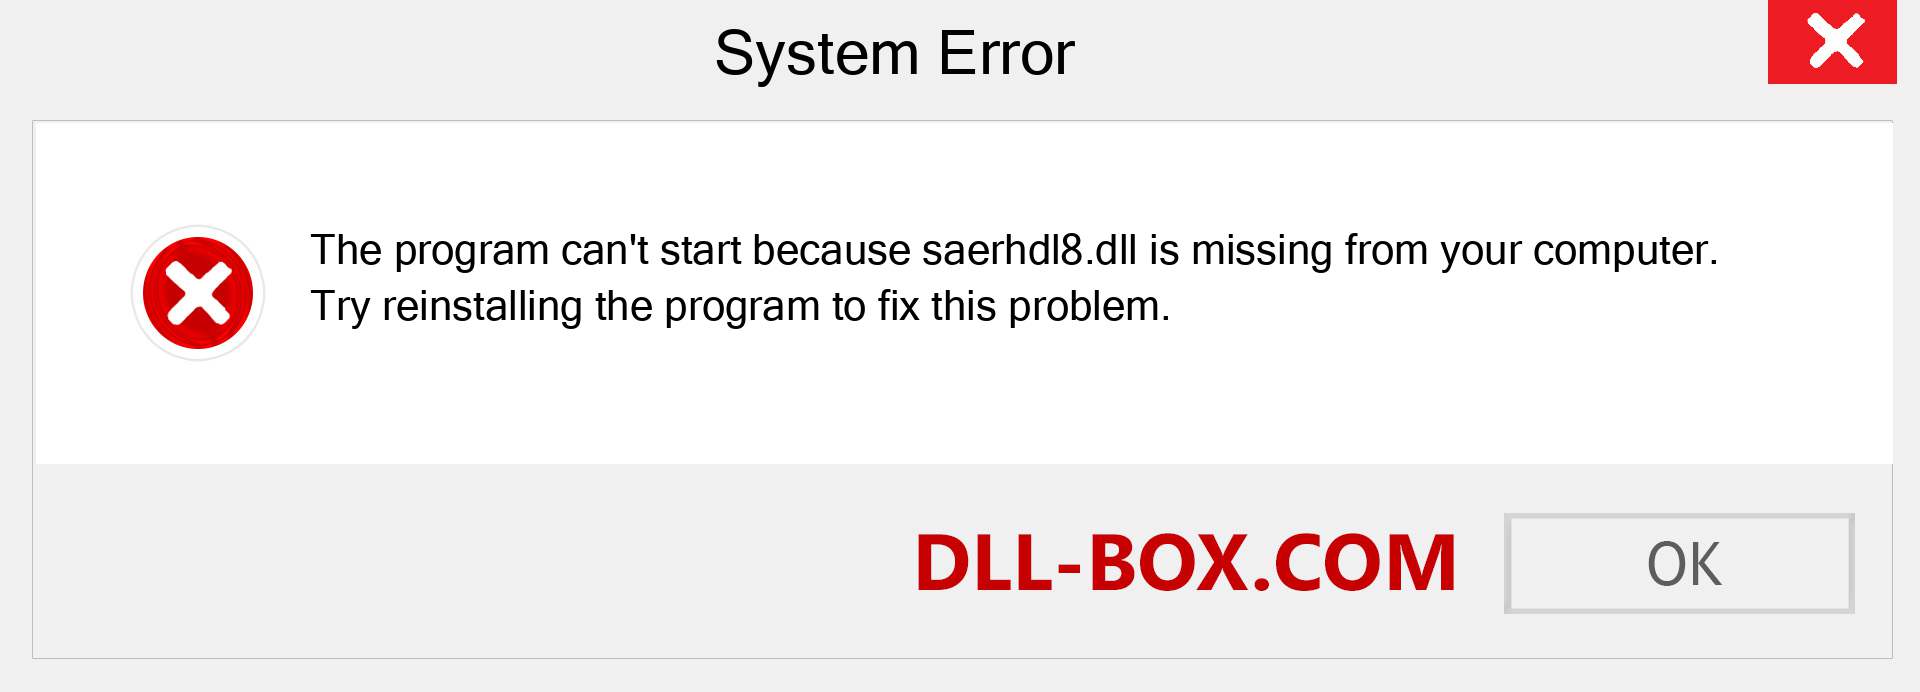  saerhdl8.dll file is missing?. Download for Windows 7, 8, 10 - Fix  saerhdl8 dll Missing Error on Windows, photos, images